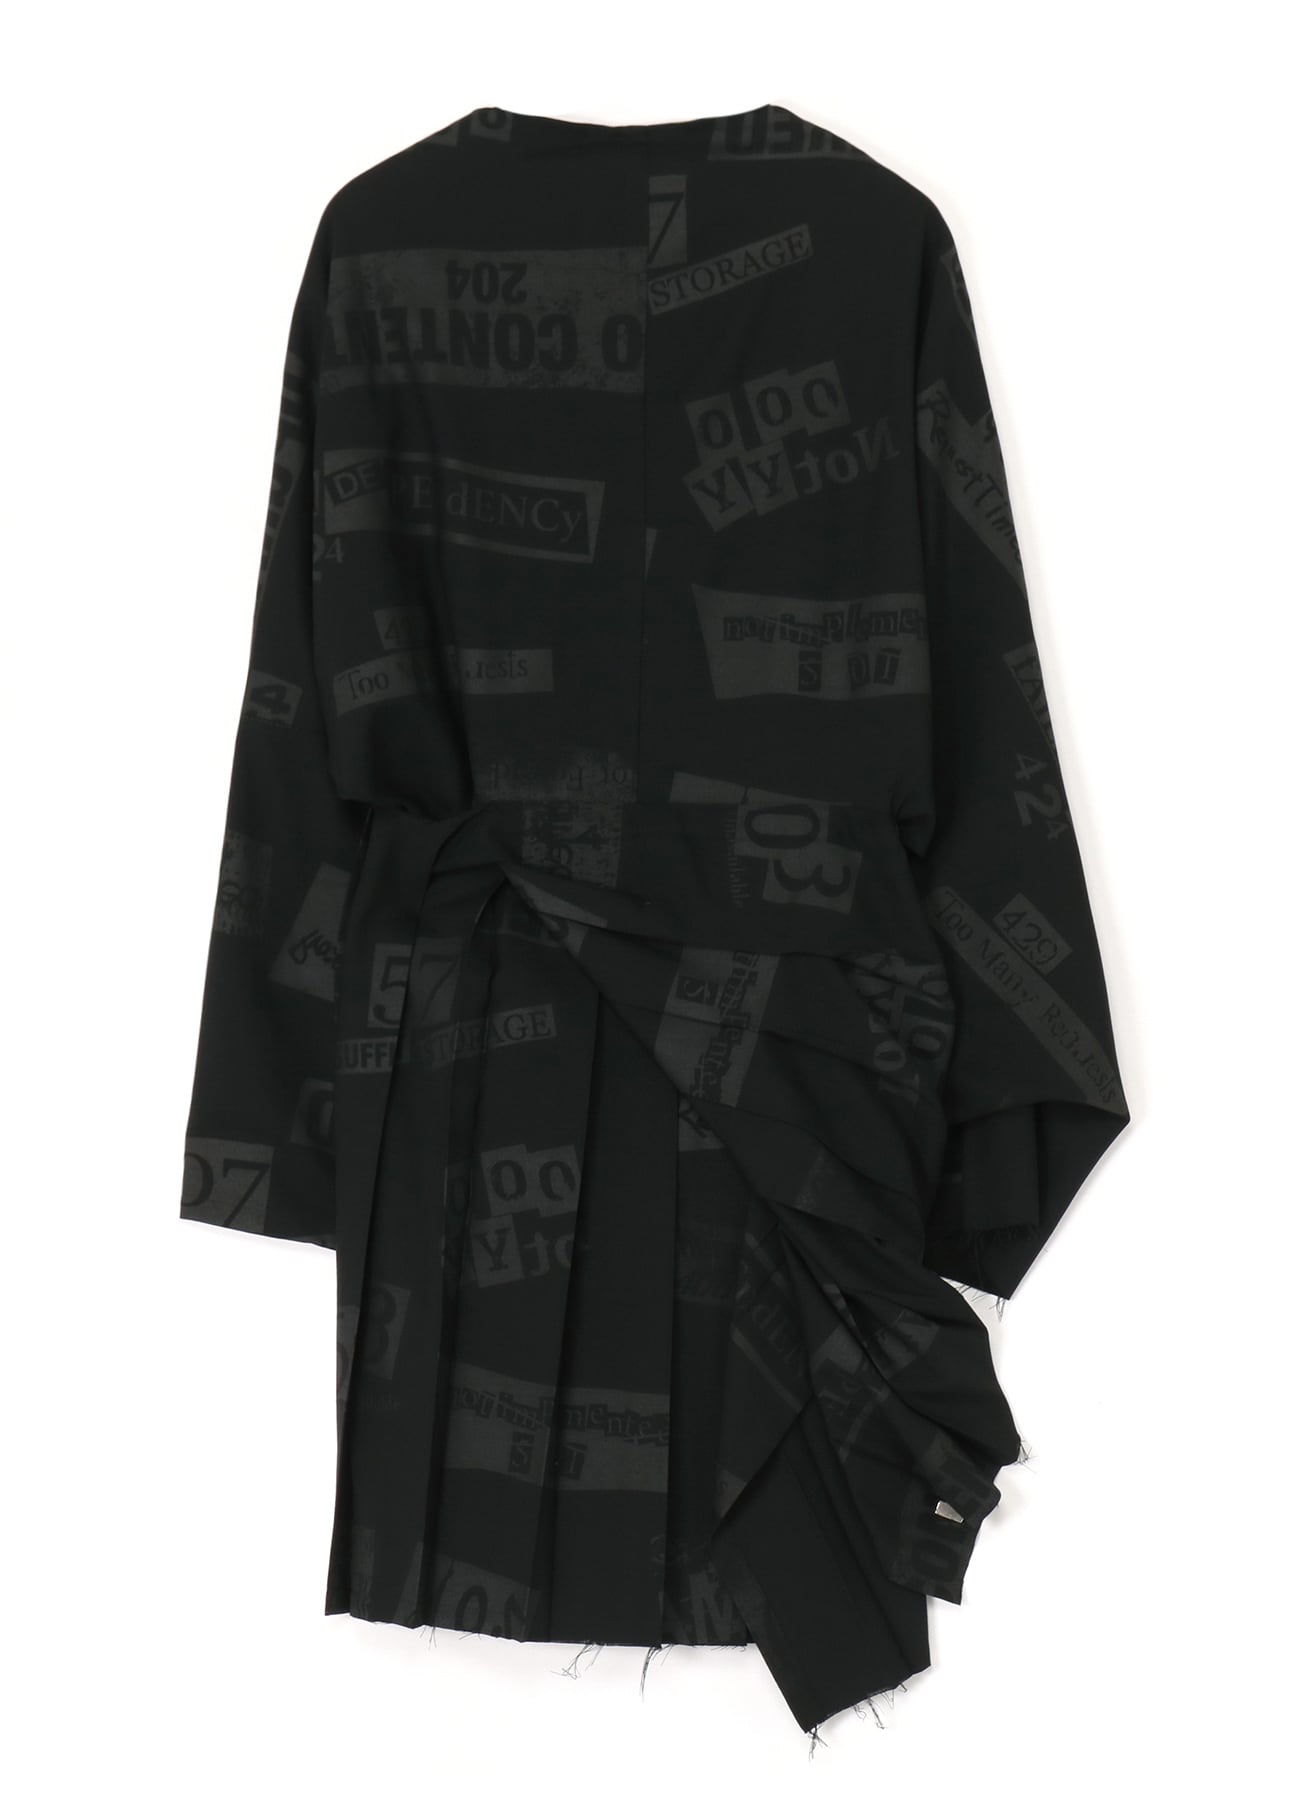 PRINTED SERGE DRESS WITH PLEATED FRONT DETAILS